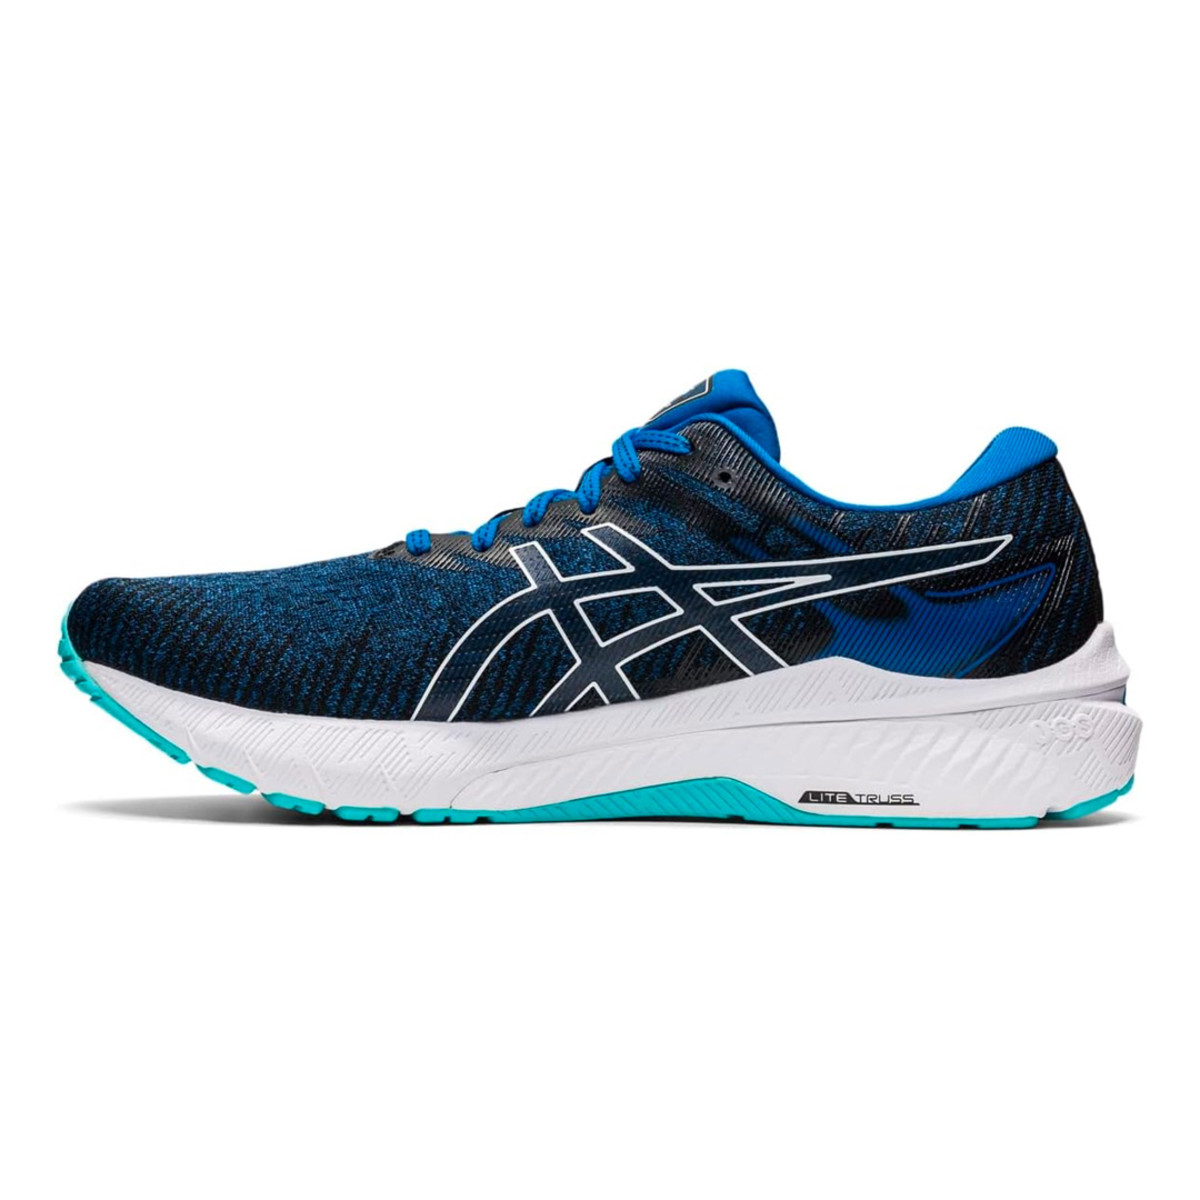 The Asics GT-2000 10 for Men Are Up to 54% Off at Amazon - Men's Journal